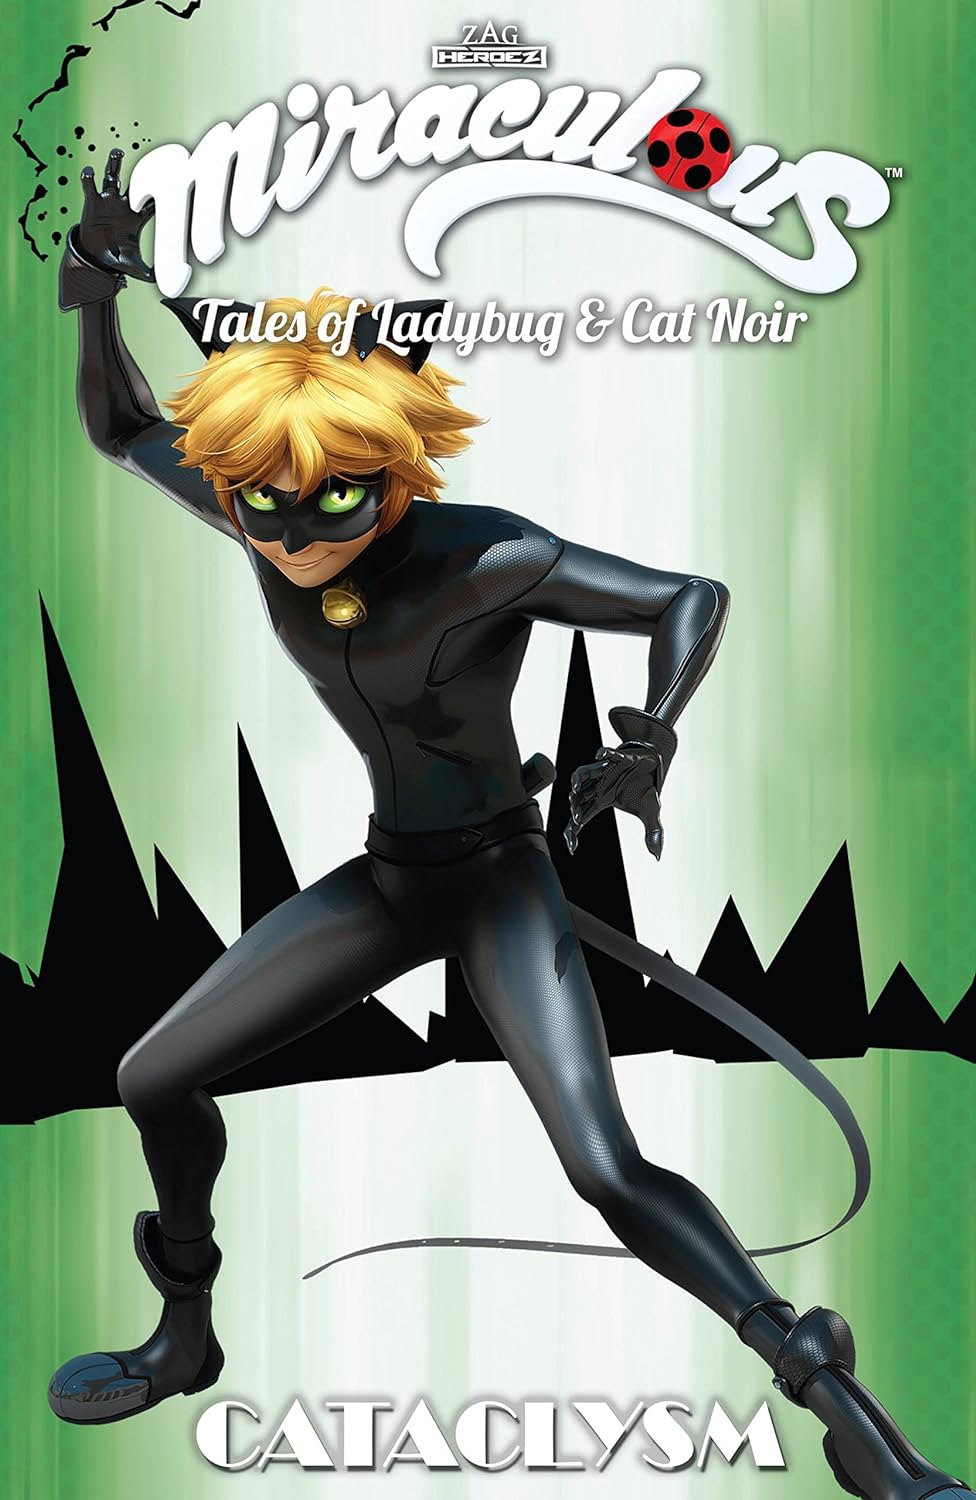 MIRACULOUS TALES OF LADY BUG AND CAT NOIR TP CATACLYSM